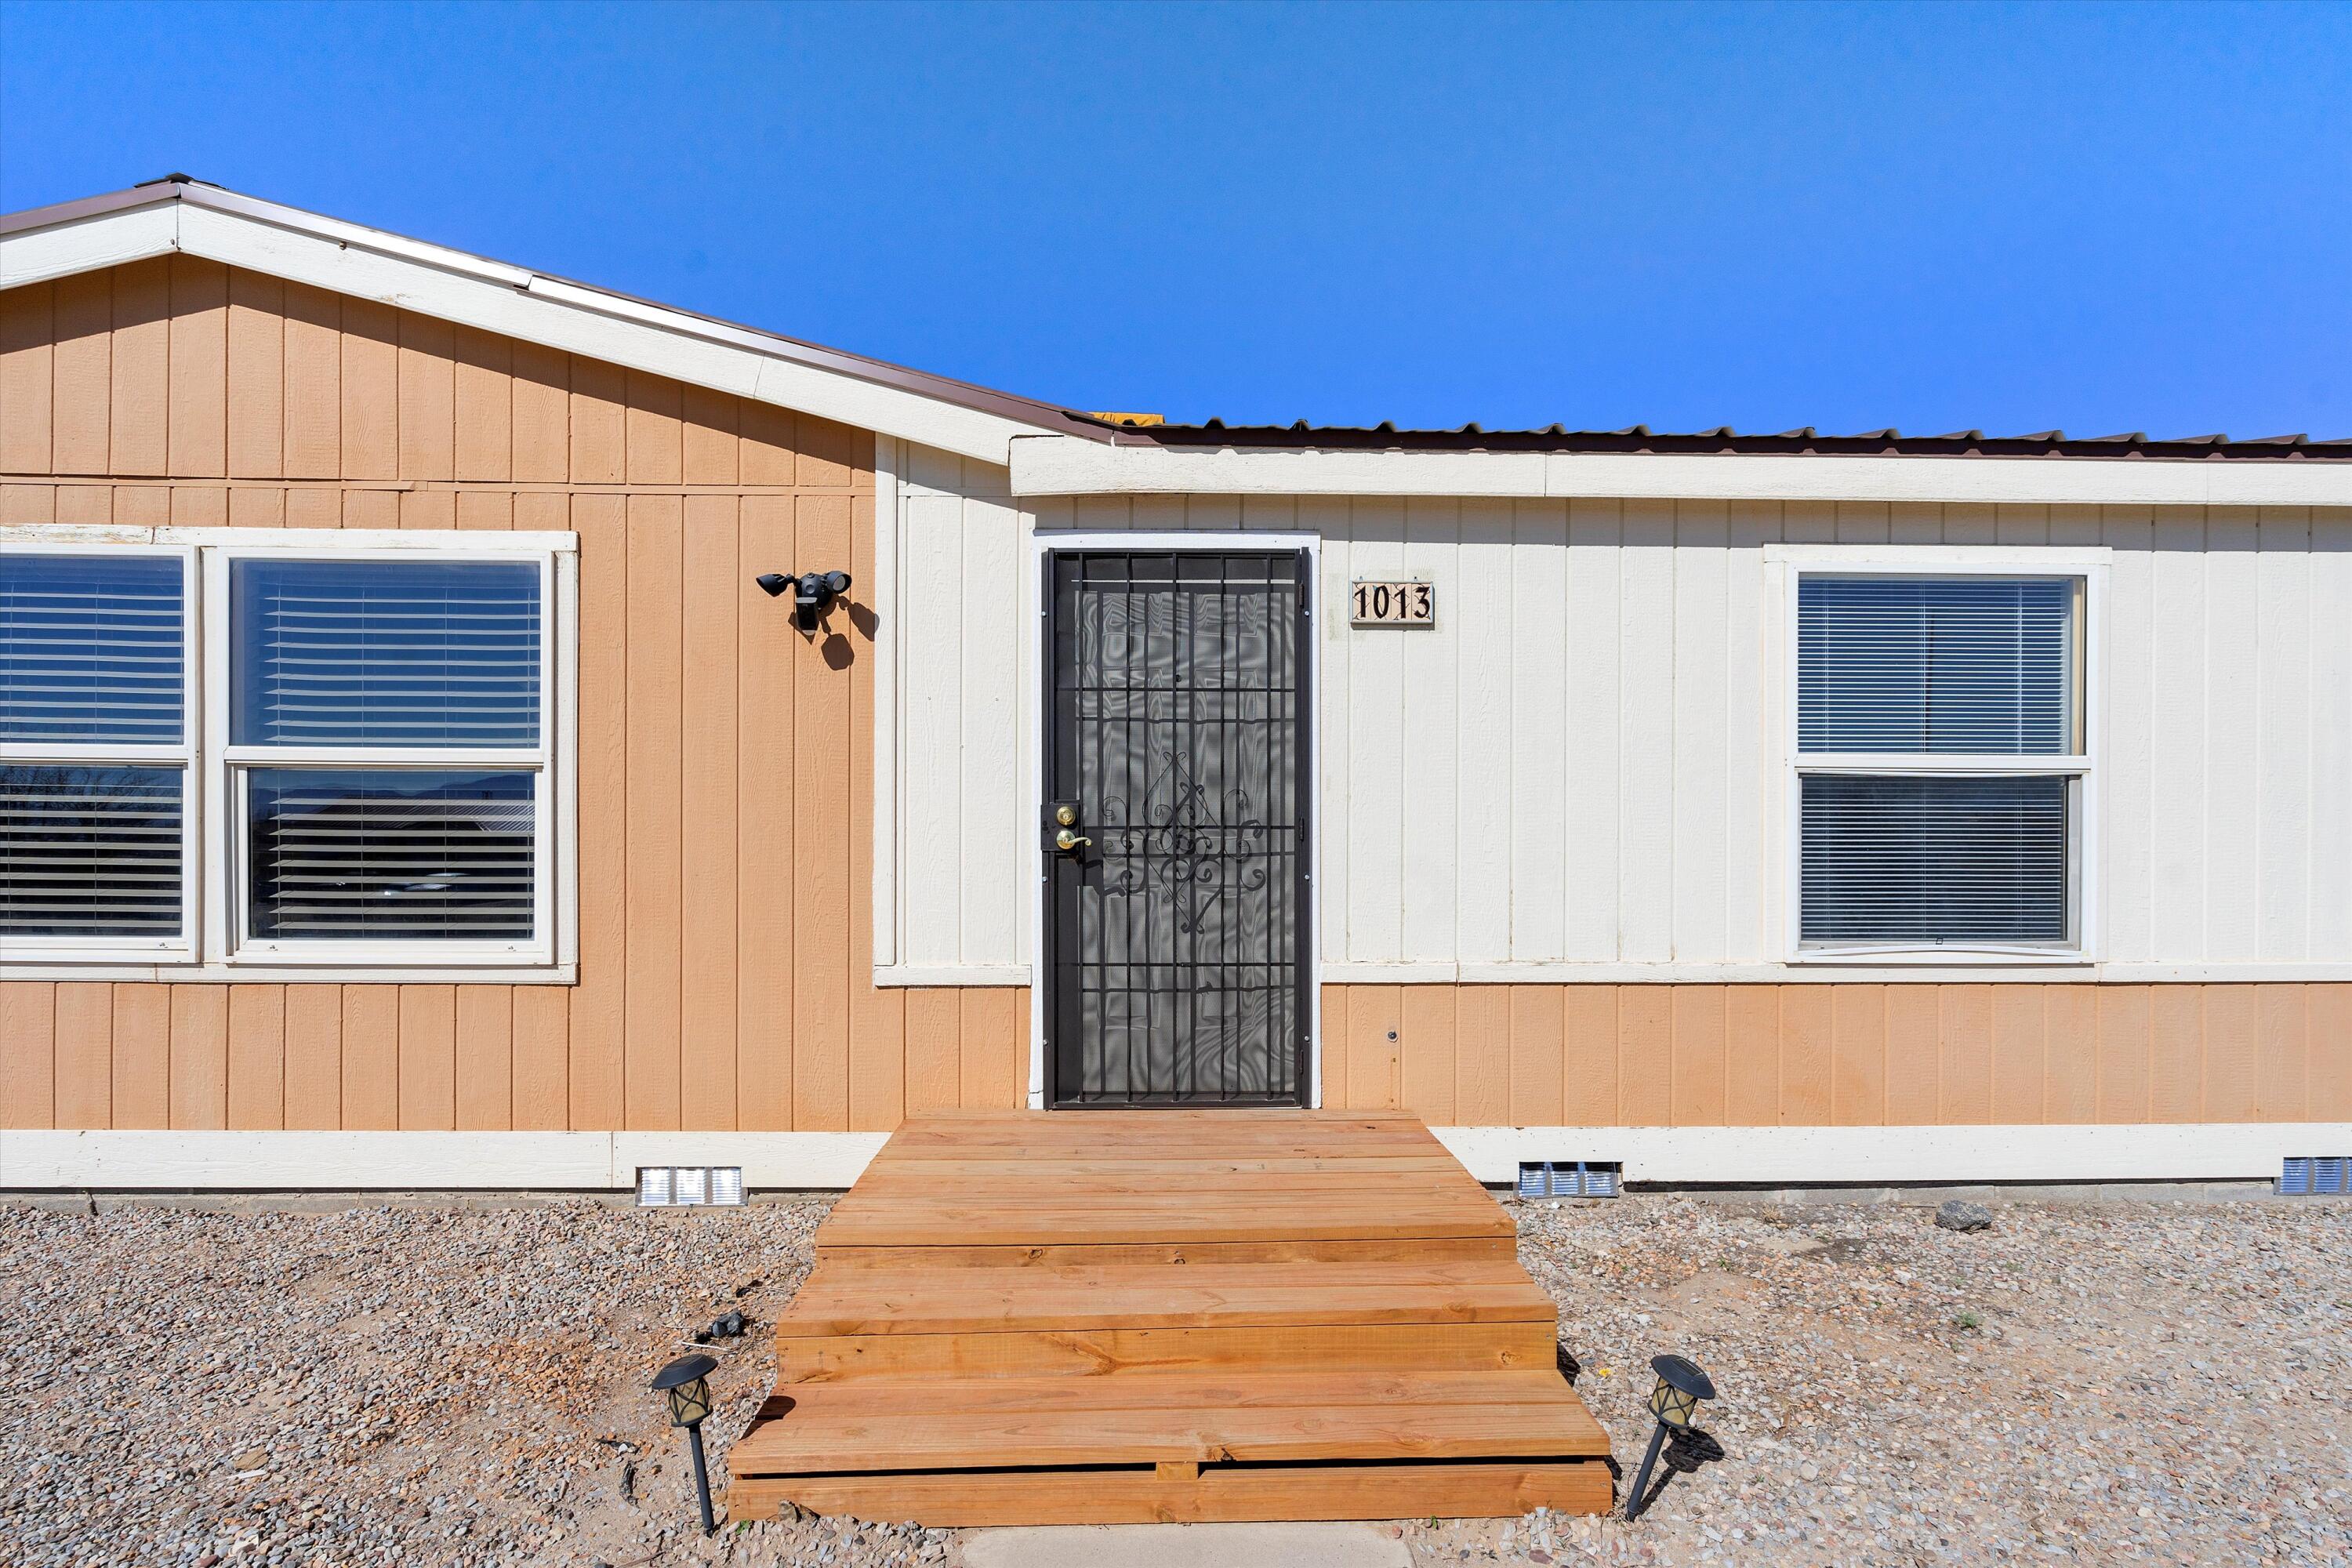 1013 11th Street Street SE, Rio Rancho, New Mexico 87124, 4 Bedrooms Bedrooms, ,2 BathroomsBathrooms,Residential,For Sale,1013 11th Street Street SE,1059714